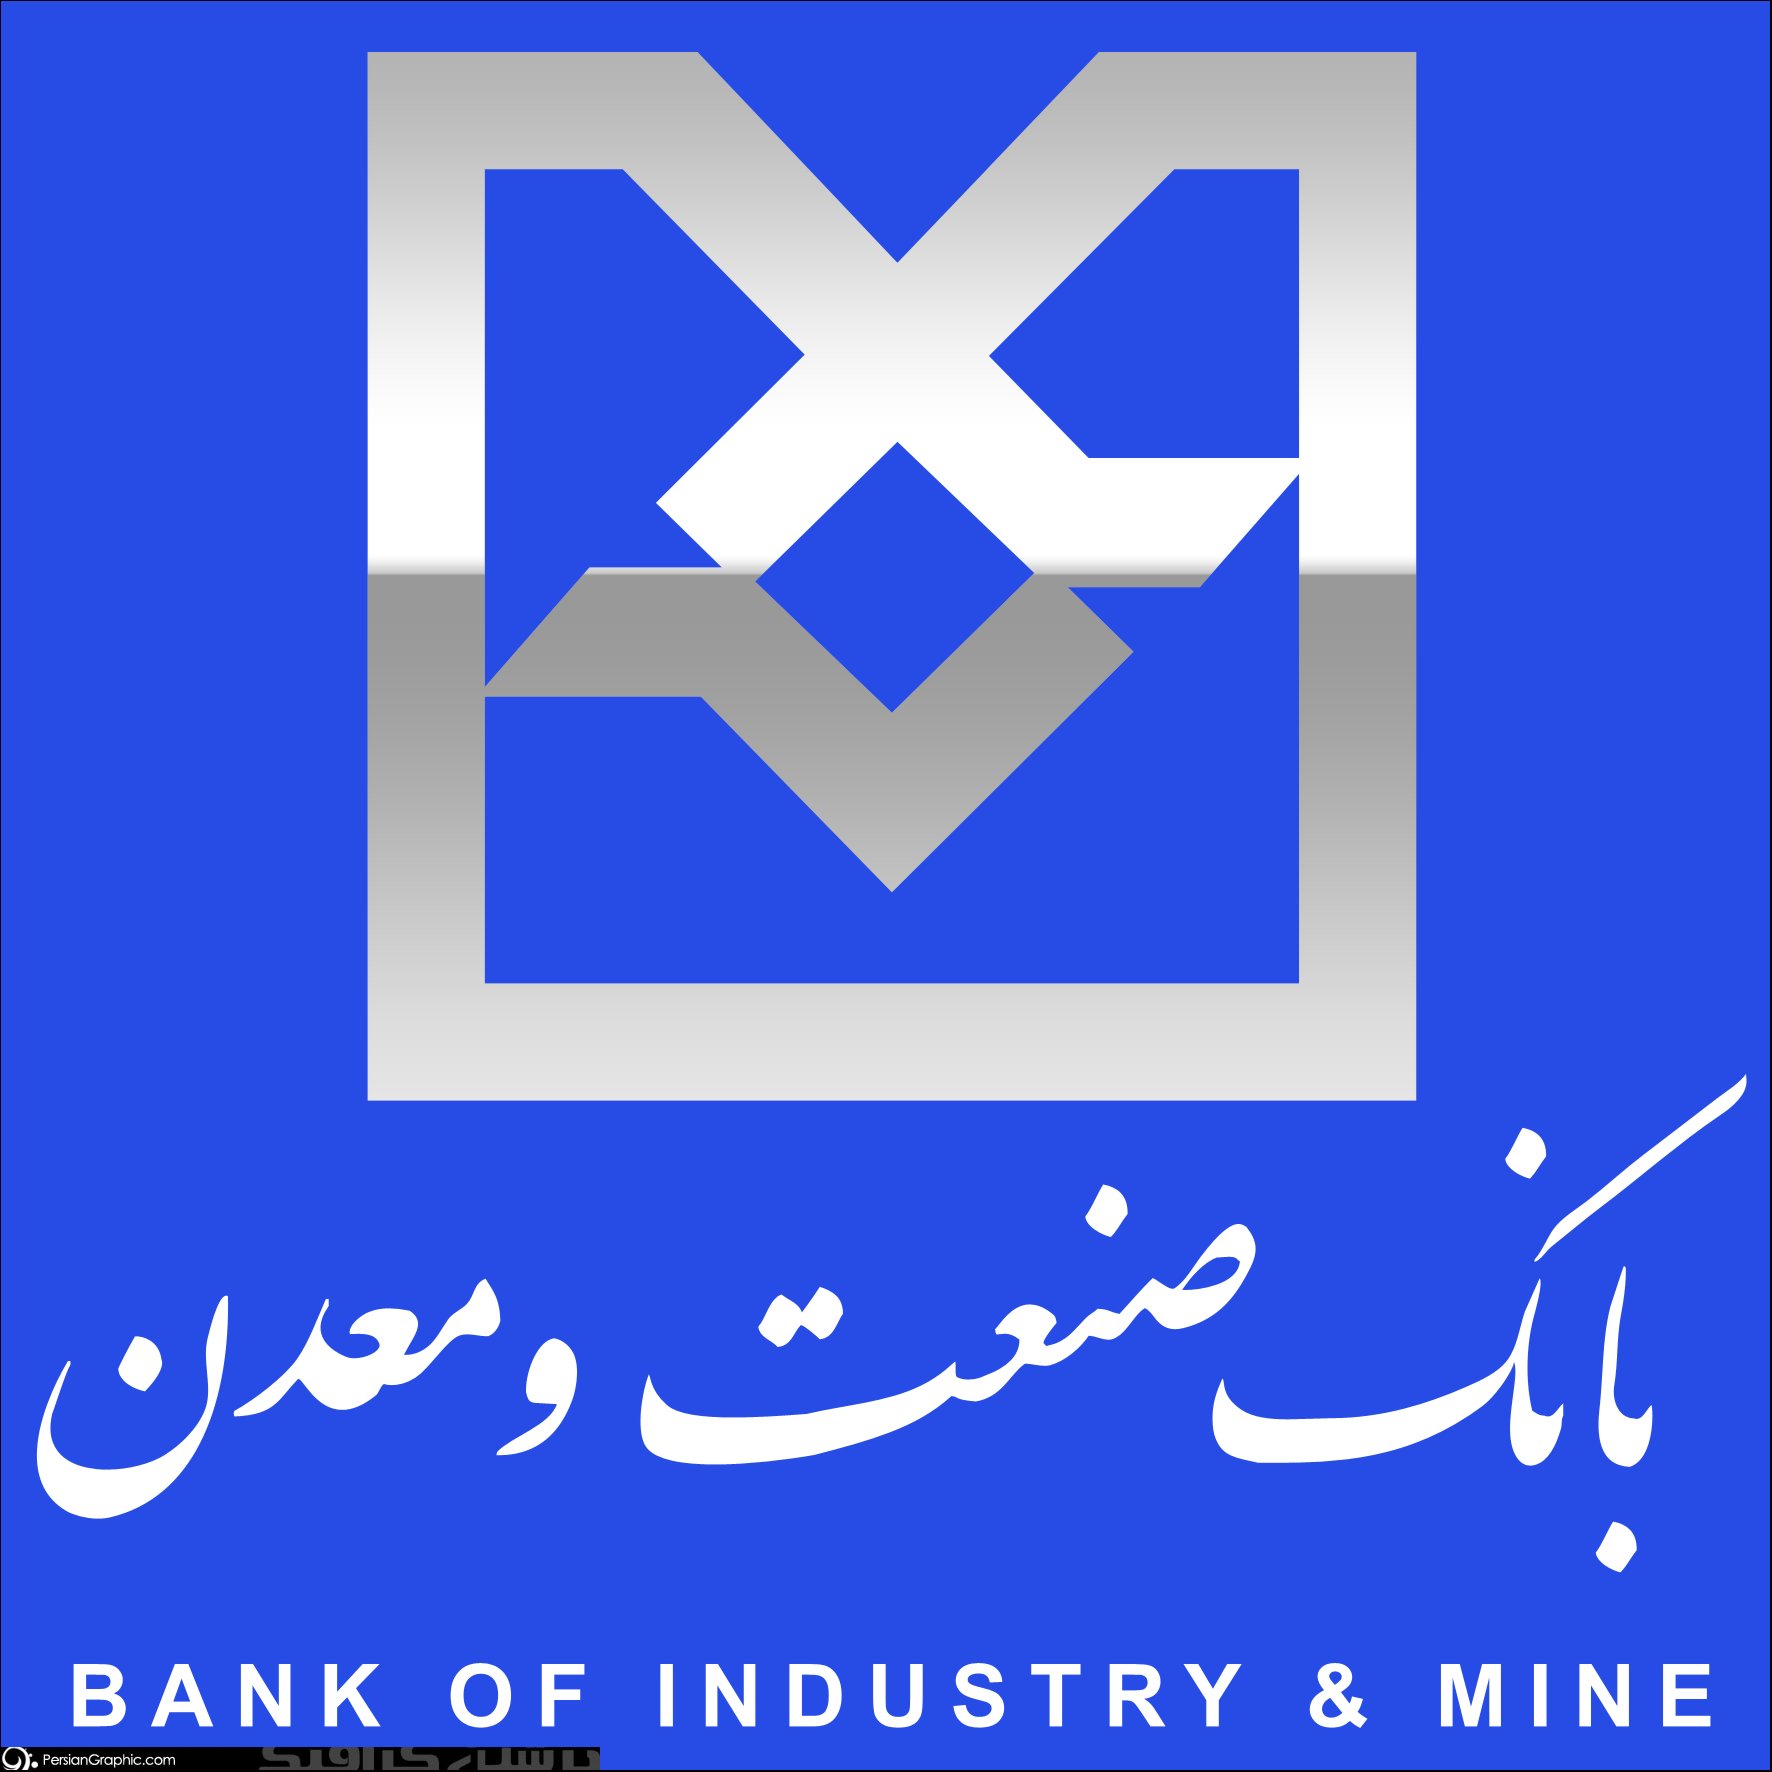 Negotiating Investors of Hamedan Petrochemical Company with Bank of Industry and Mine